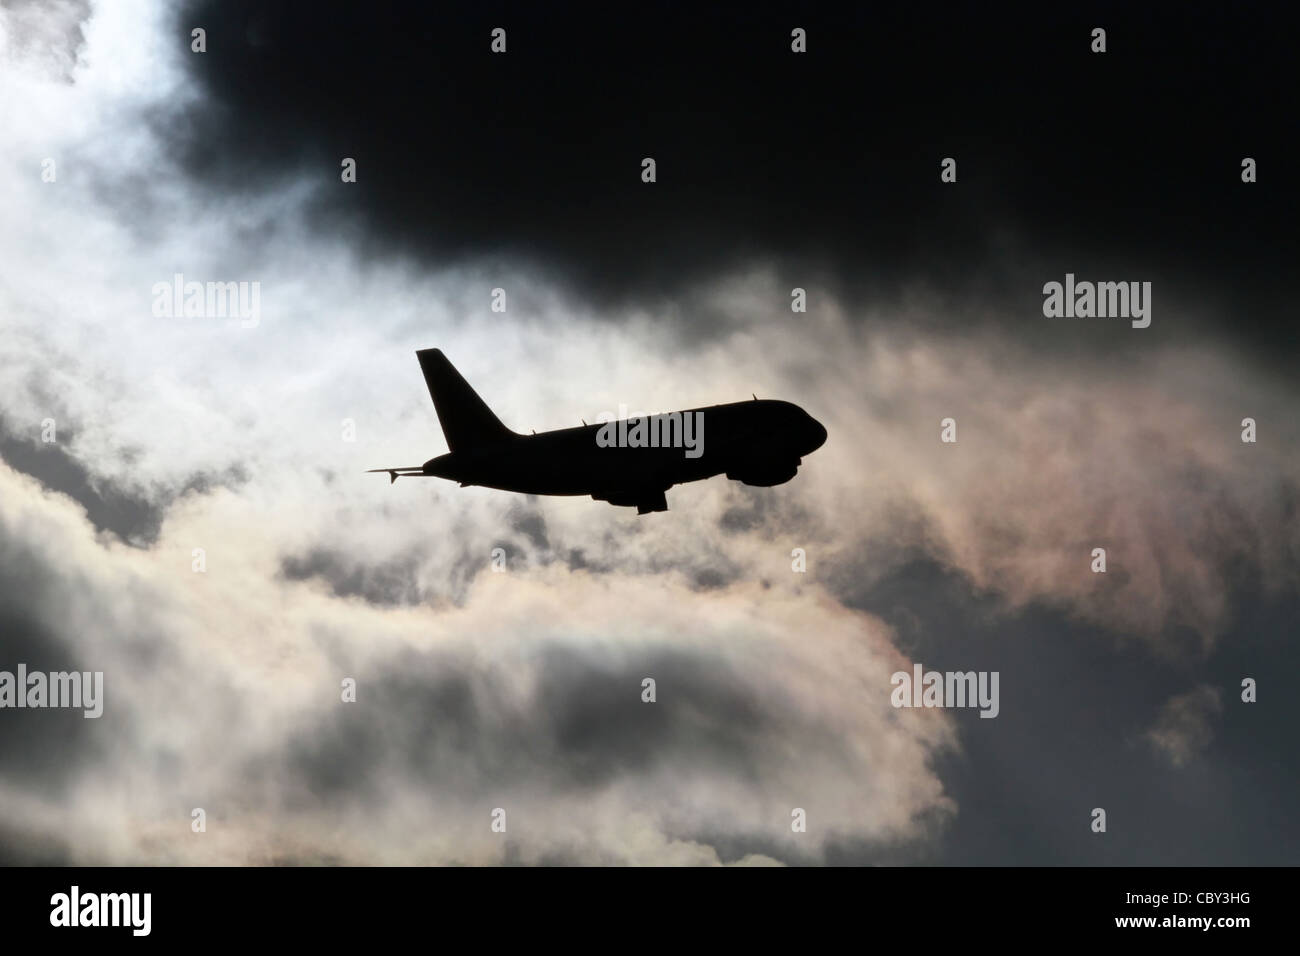 Jet airliner taking off into stormy sky Stock Photo